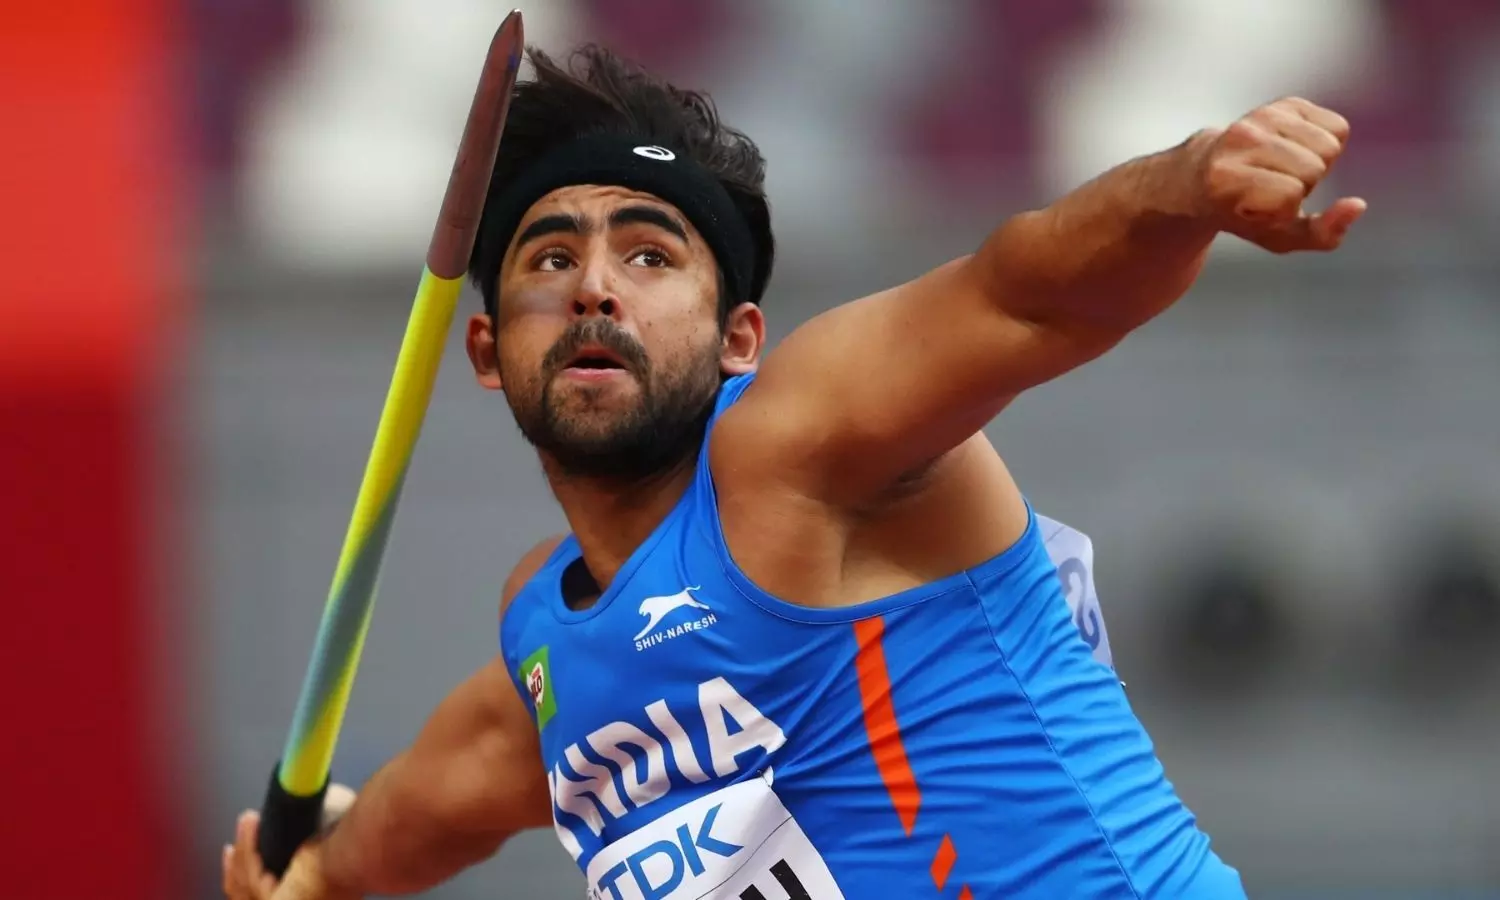 Shivpal Singh permitted to compete after suspension reduced to one year